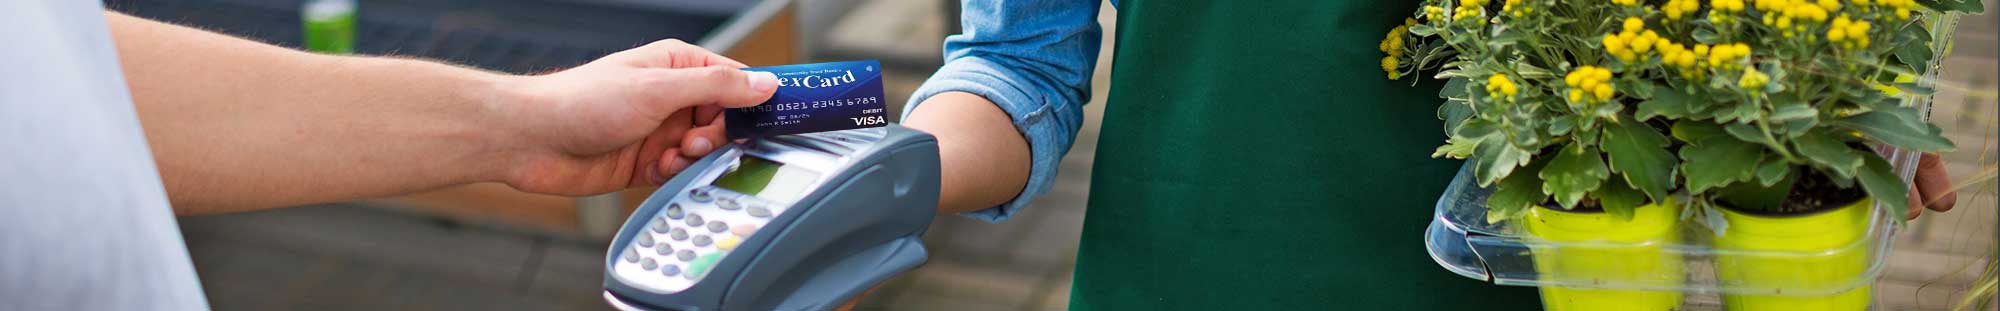 tapping a card to pay